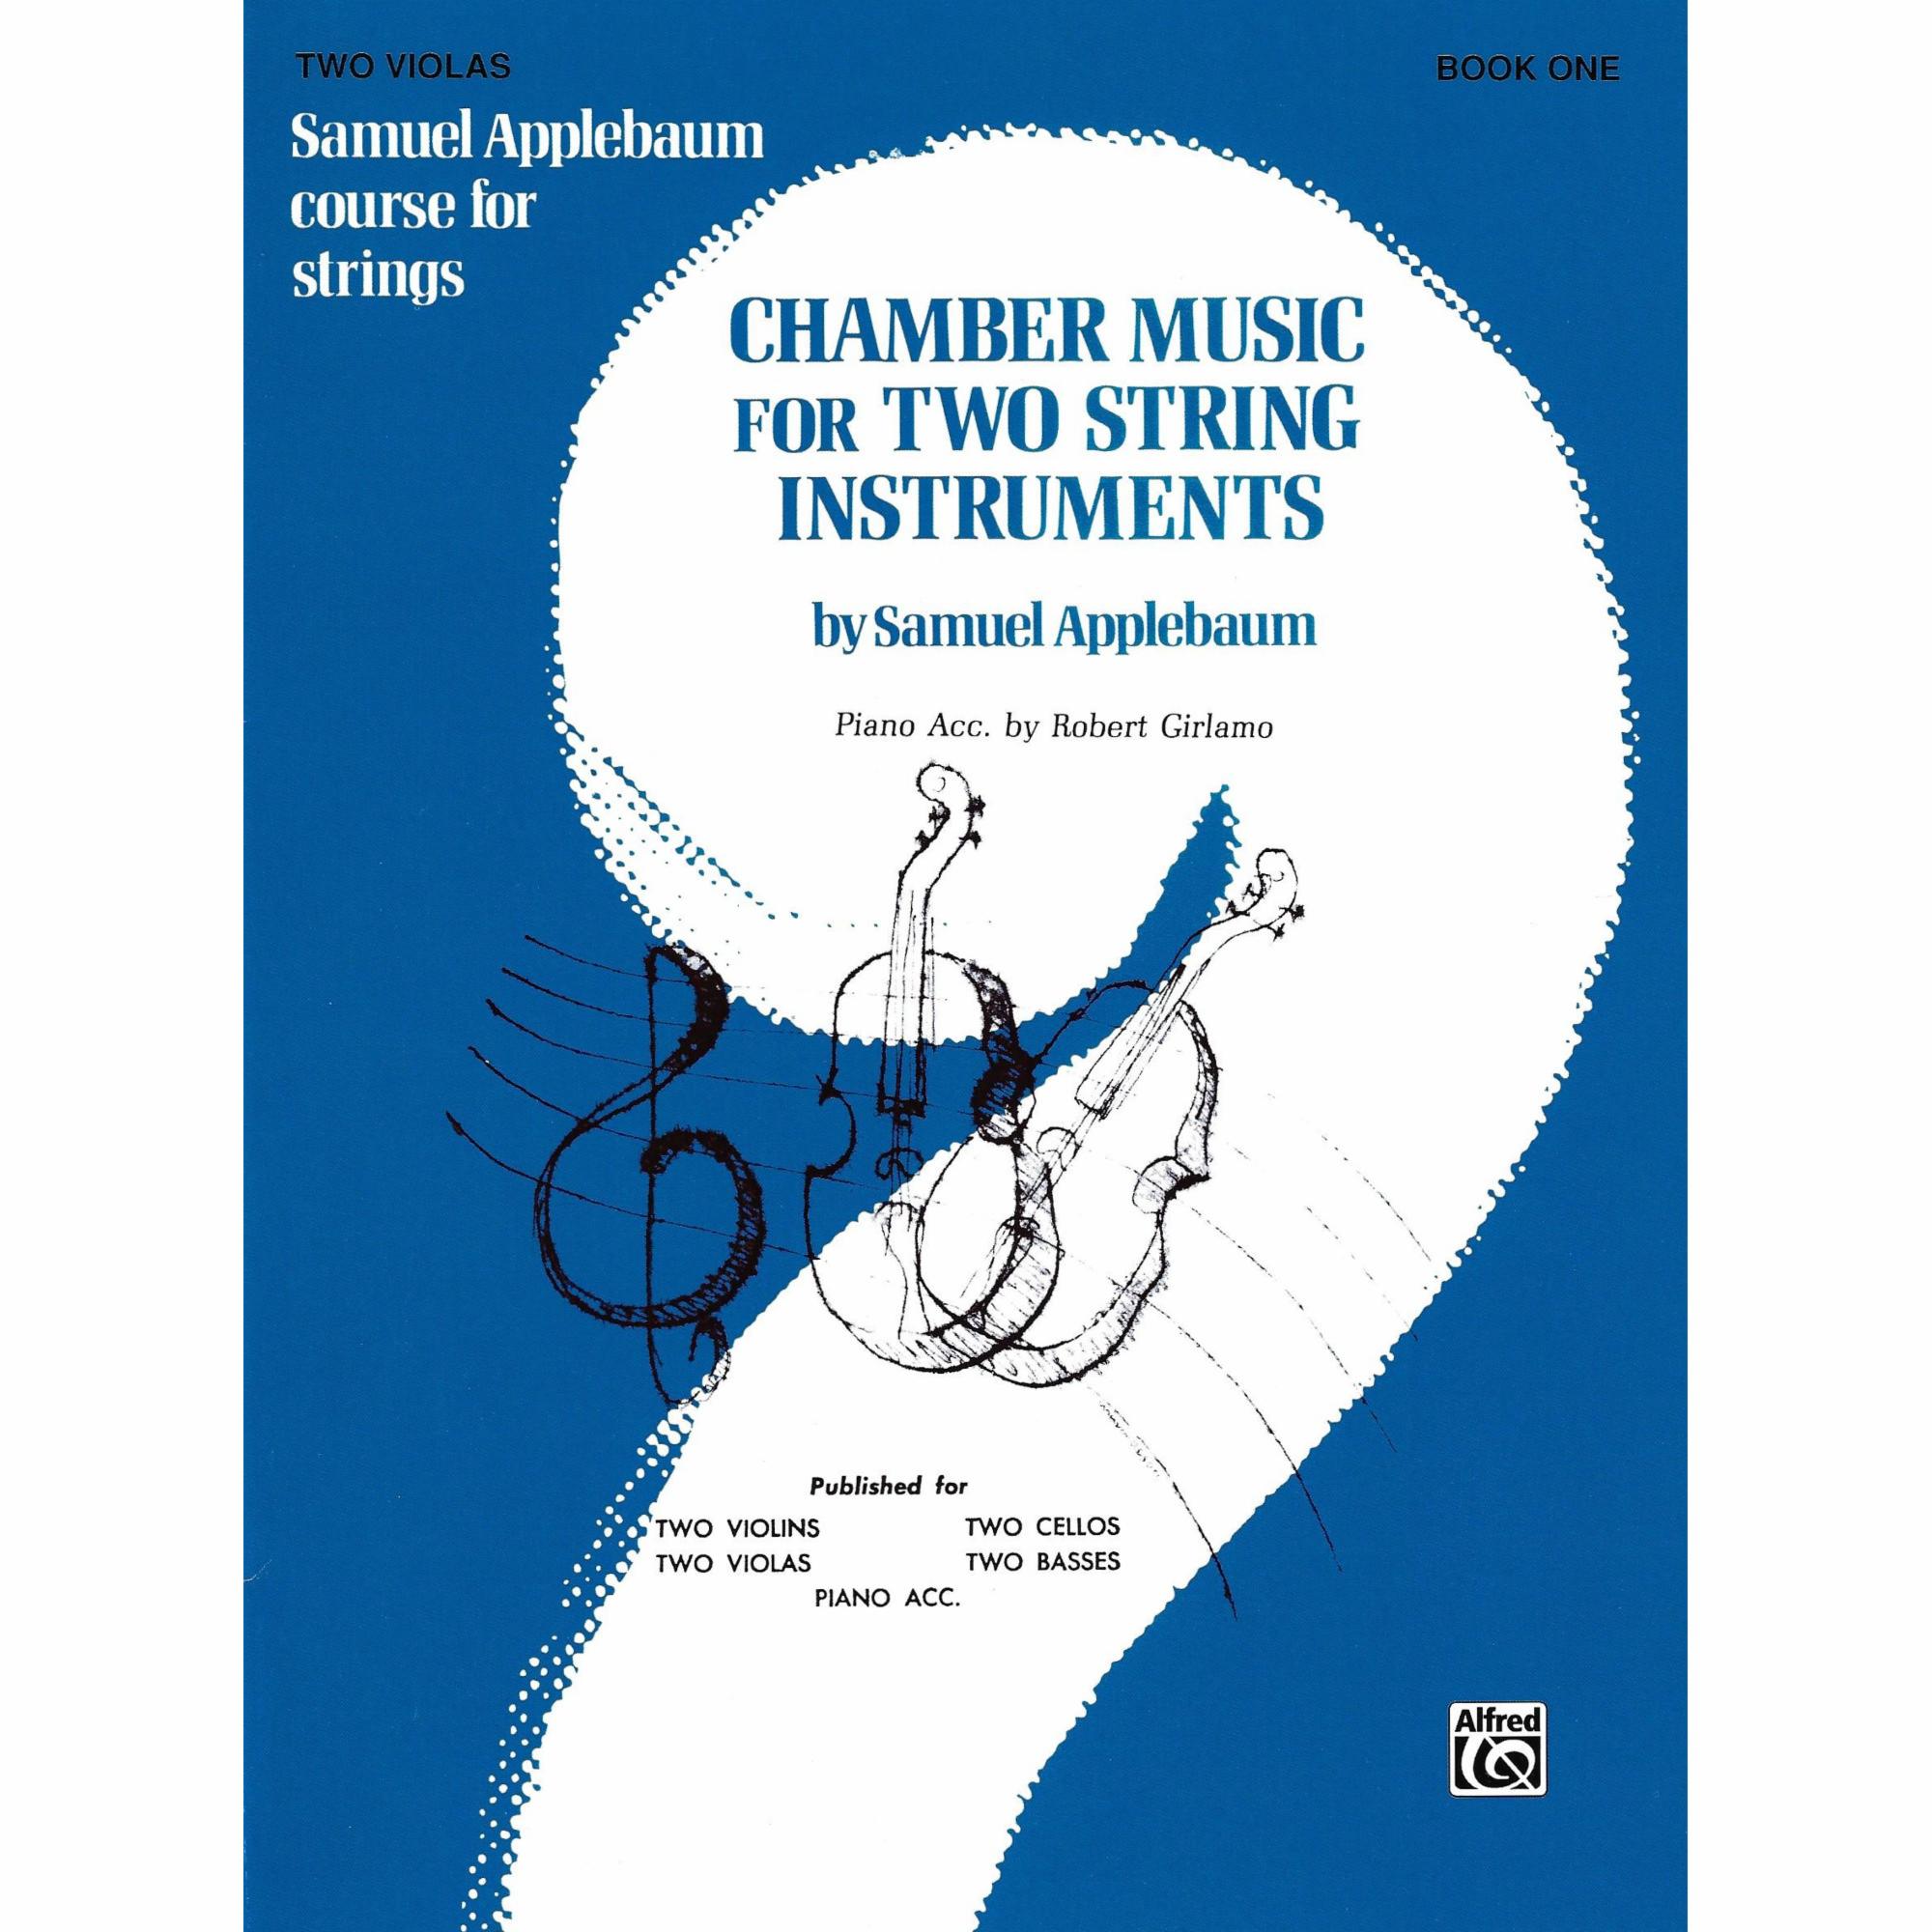 Chamber Music for Two String Instruments, Book 1